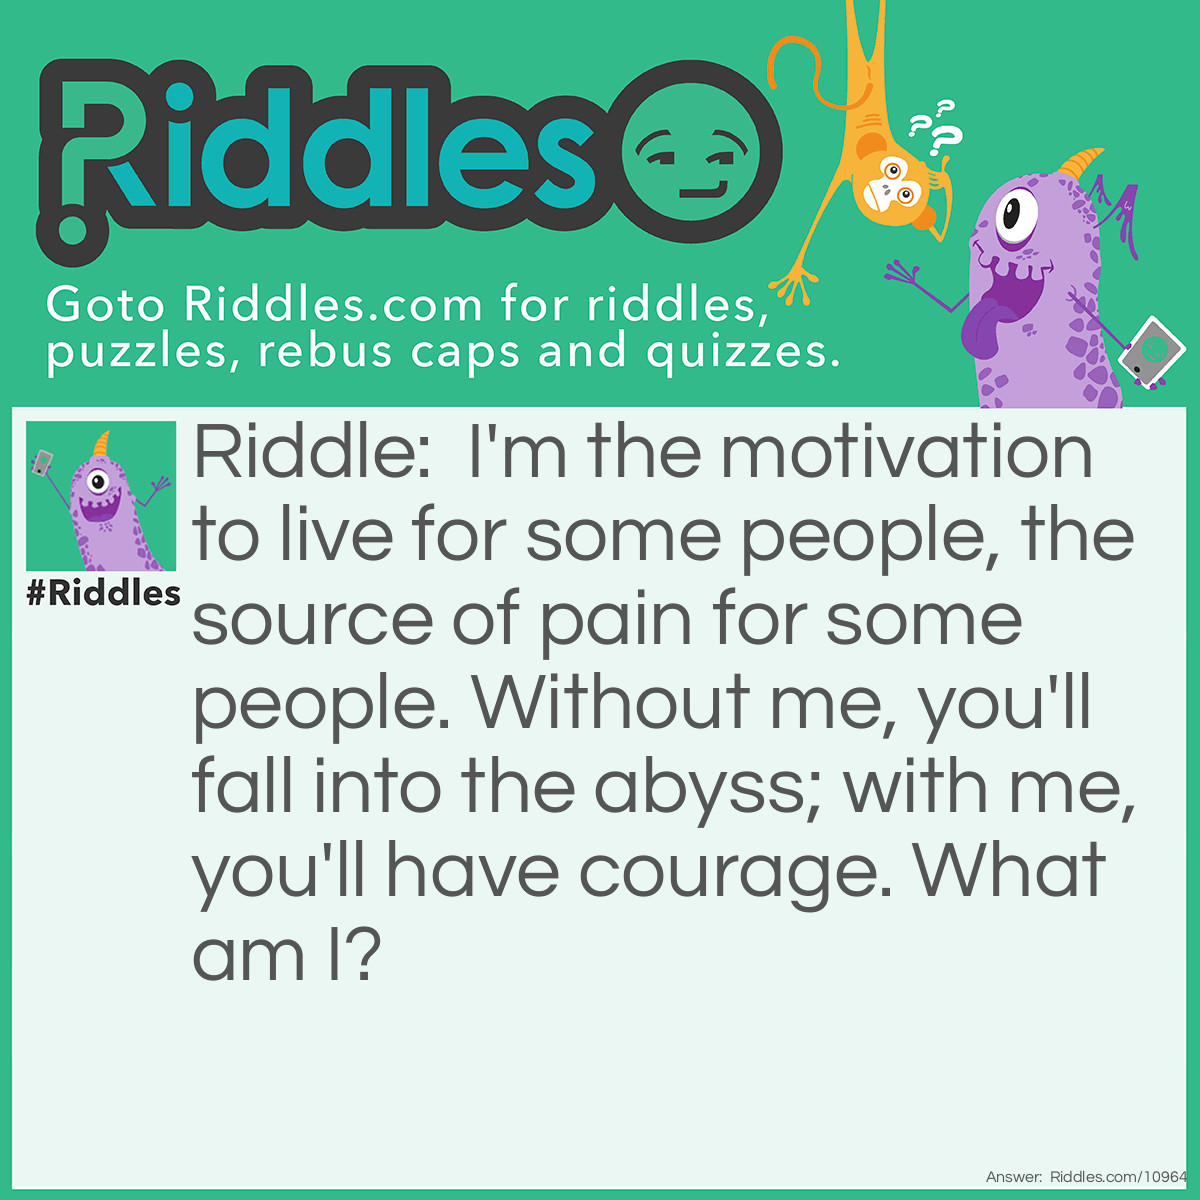 Riddle: I'm the motivation to live for some people, the source of pain for some people. Without me, you'll fall into the abyss; with me, you'll have courage. What am I? Answer: I am "hope".